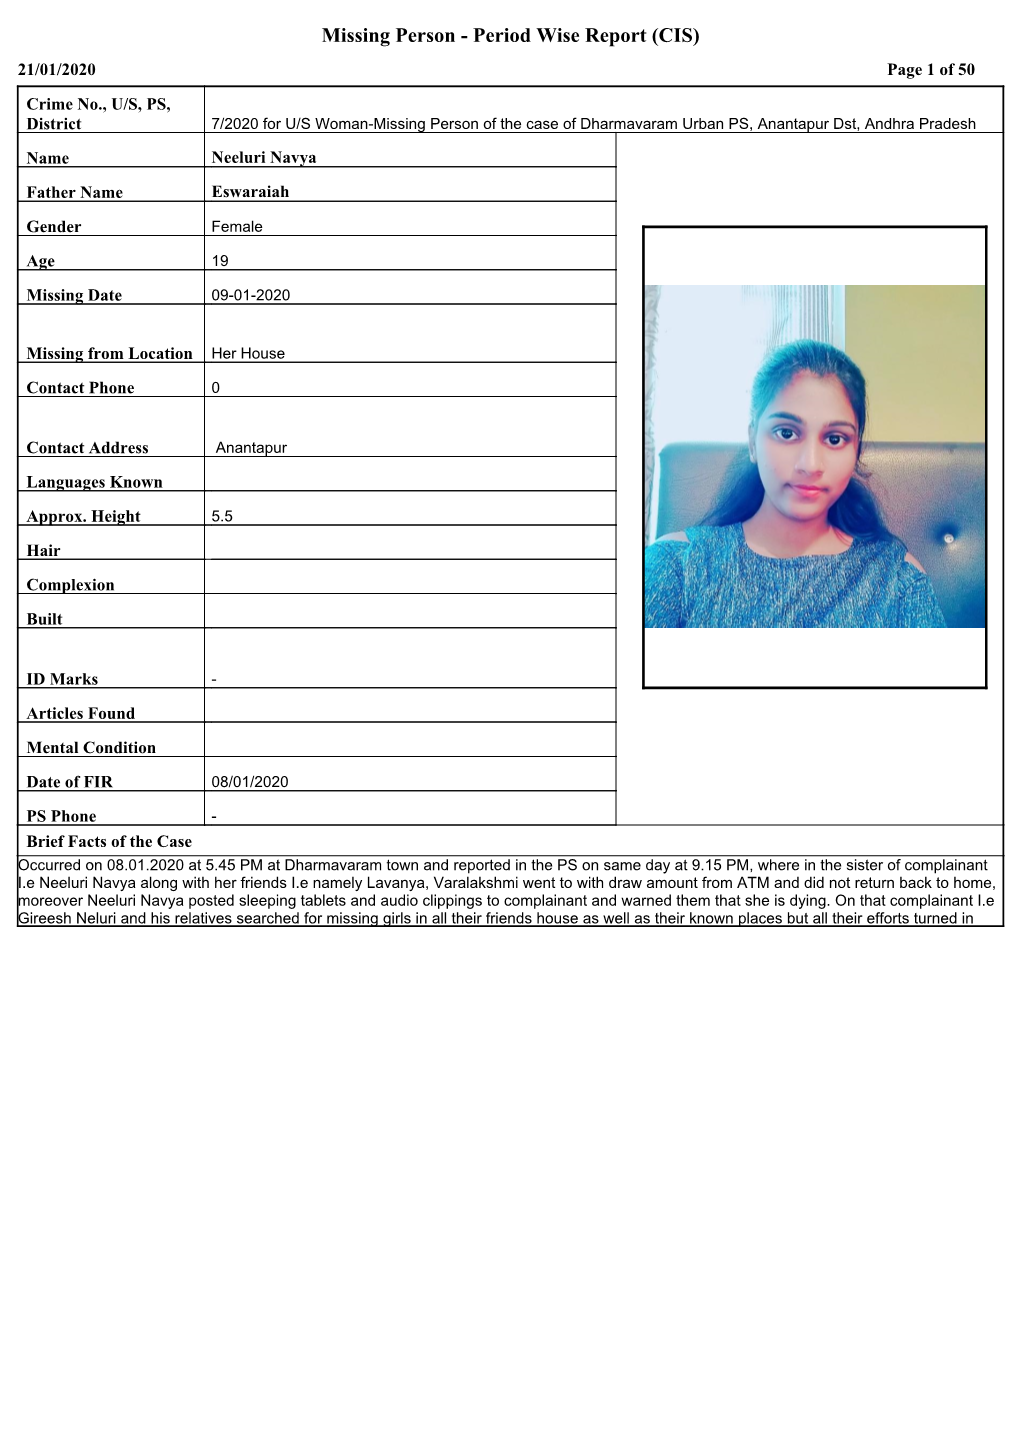 Missing Person - Period Wise Report (CIS) 21/01/2020 Page 1 of 50